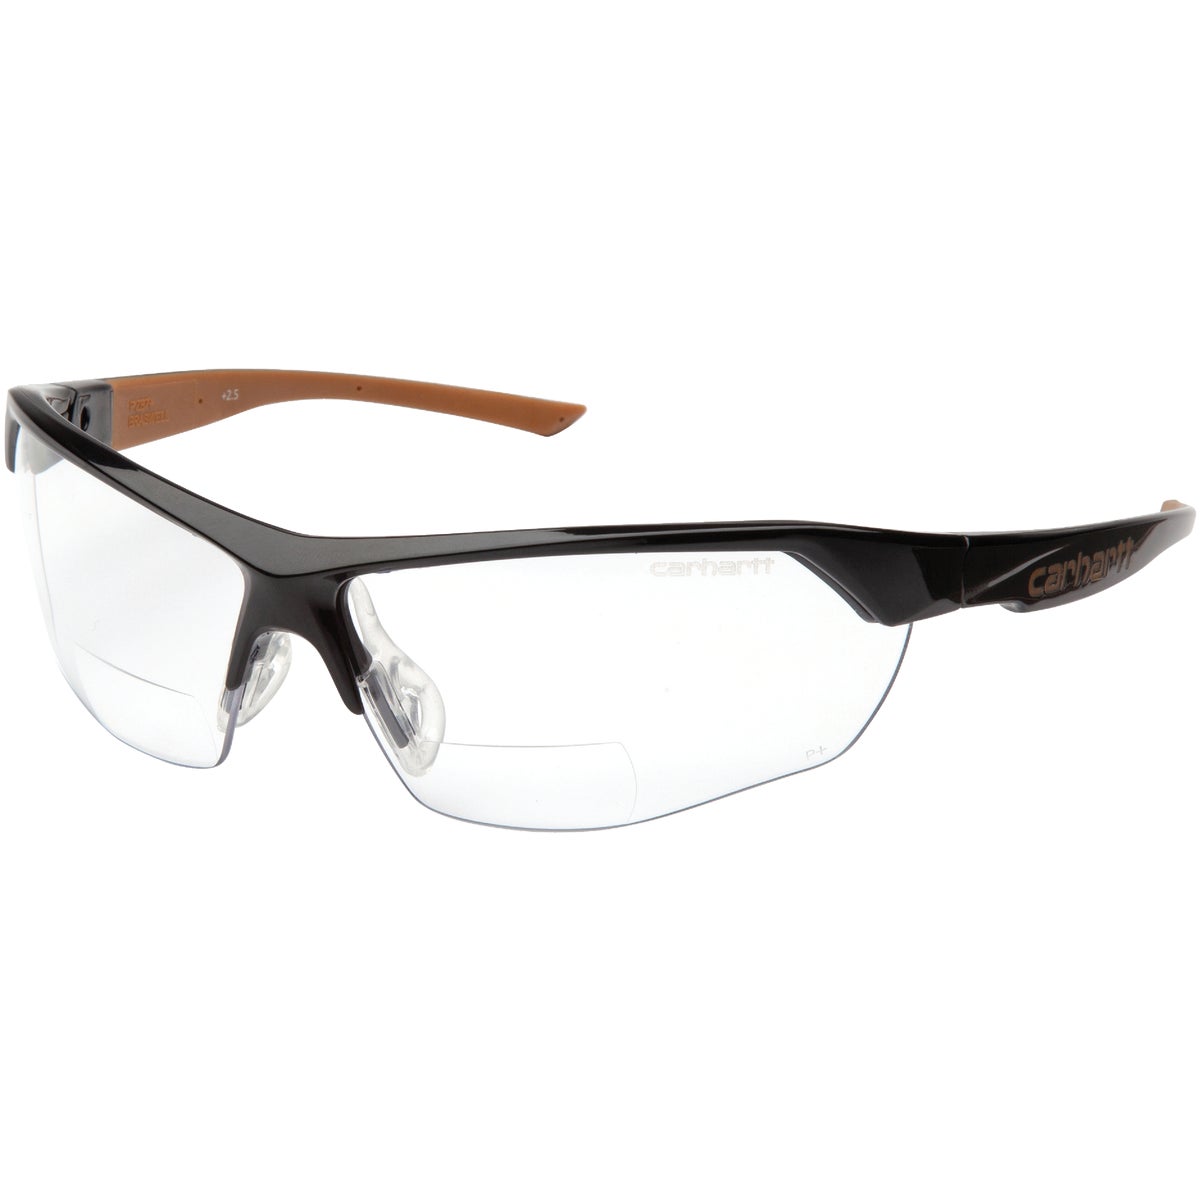 Carhartt Braswell Black Frame Reader Safety Glasses with Clear Anti-Fog Lenses, 2.0 Diopter